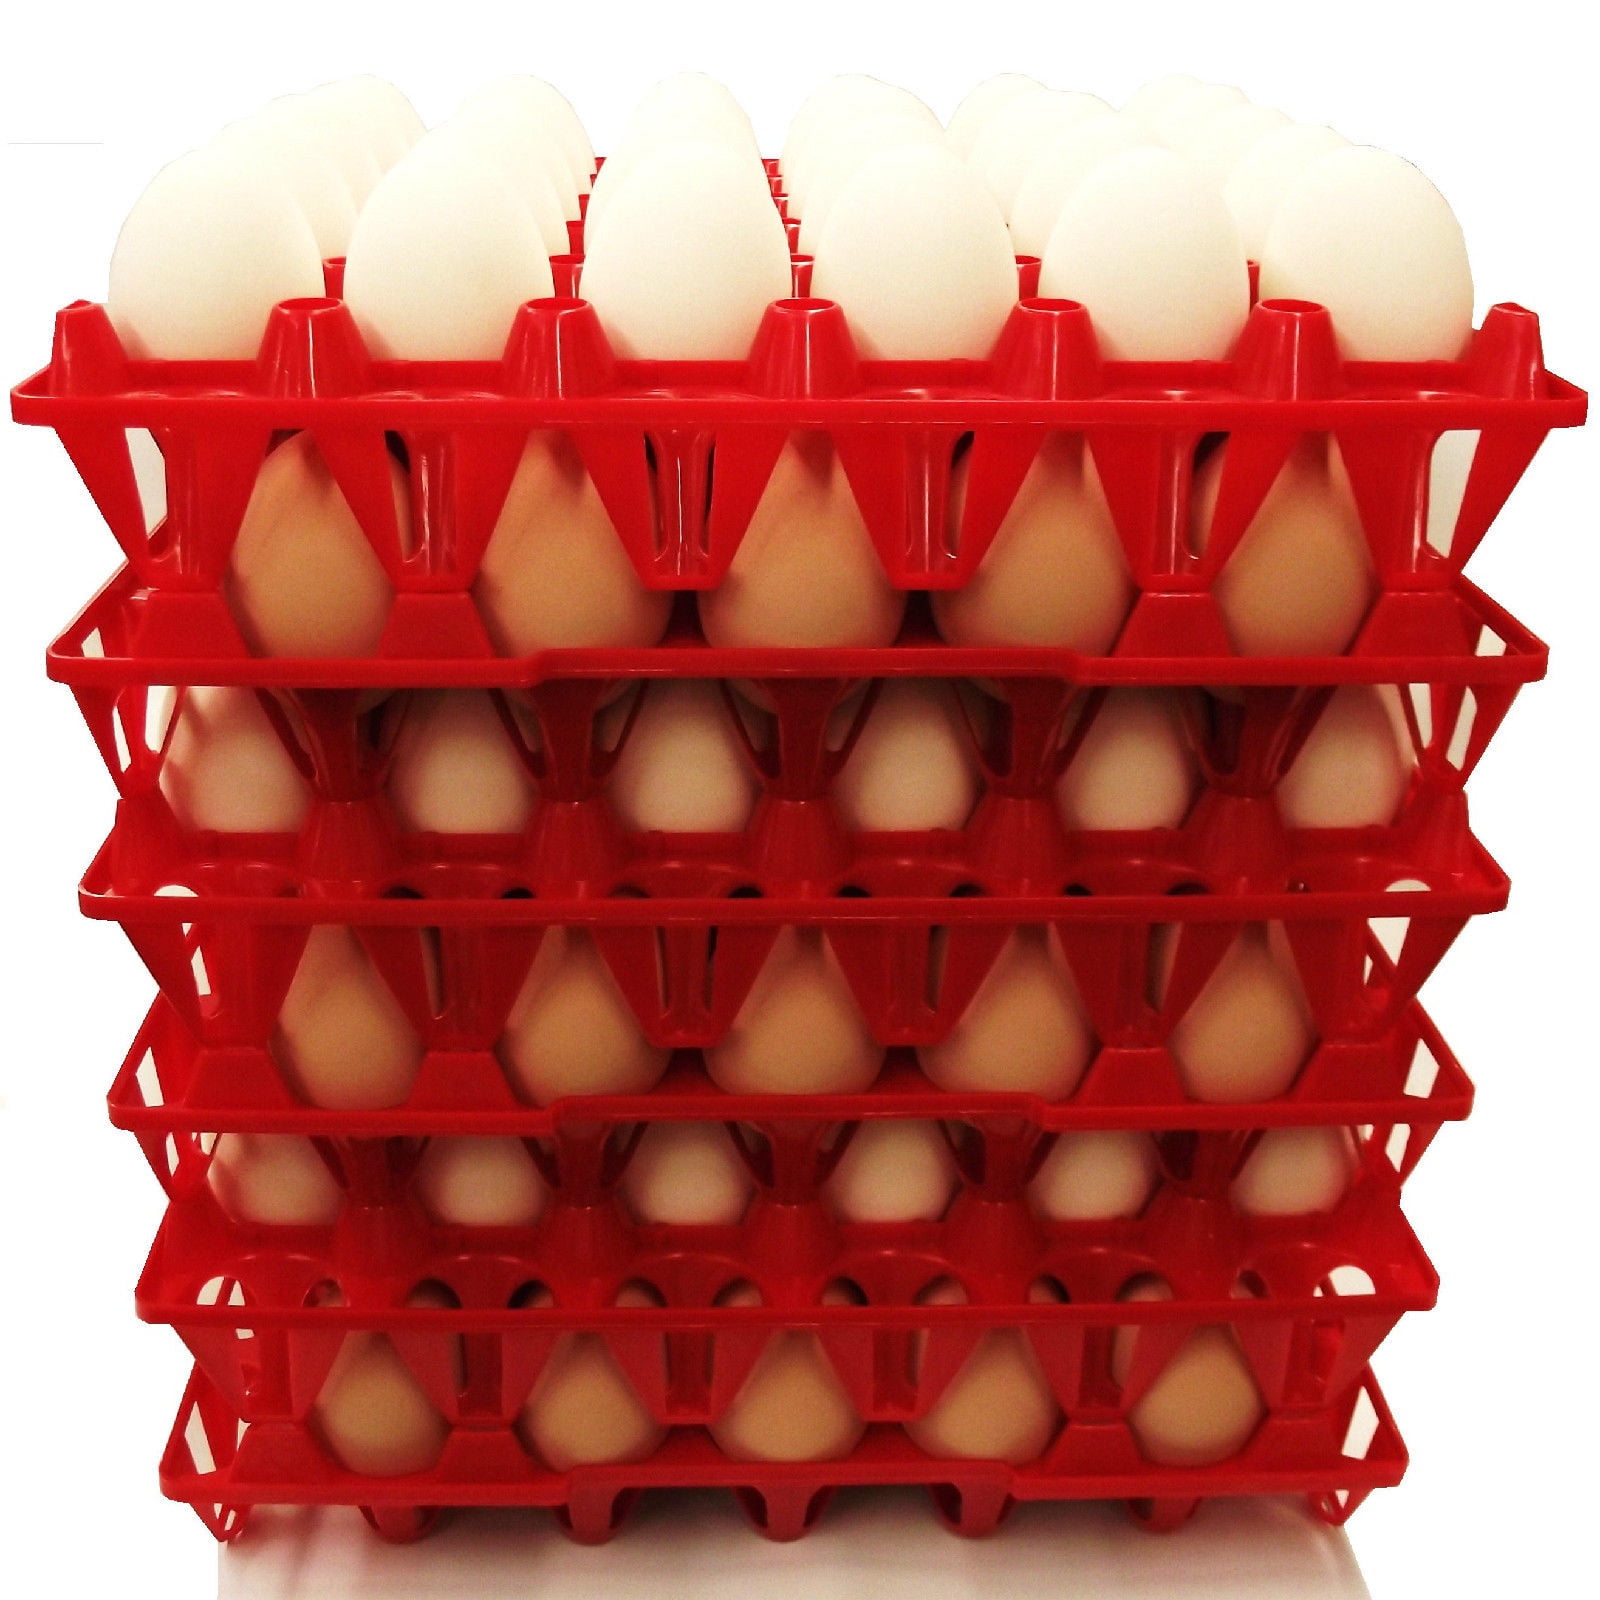 96 RITE FARM PRODUCTS 12 EGG POLY CHICKEN TRAYS SHIPPING CARTON POULTRY FLAT 685349881079 